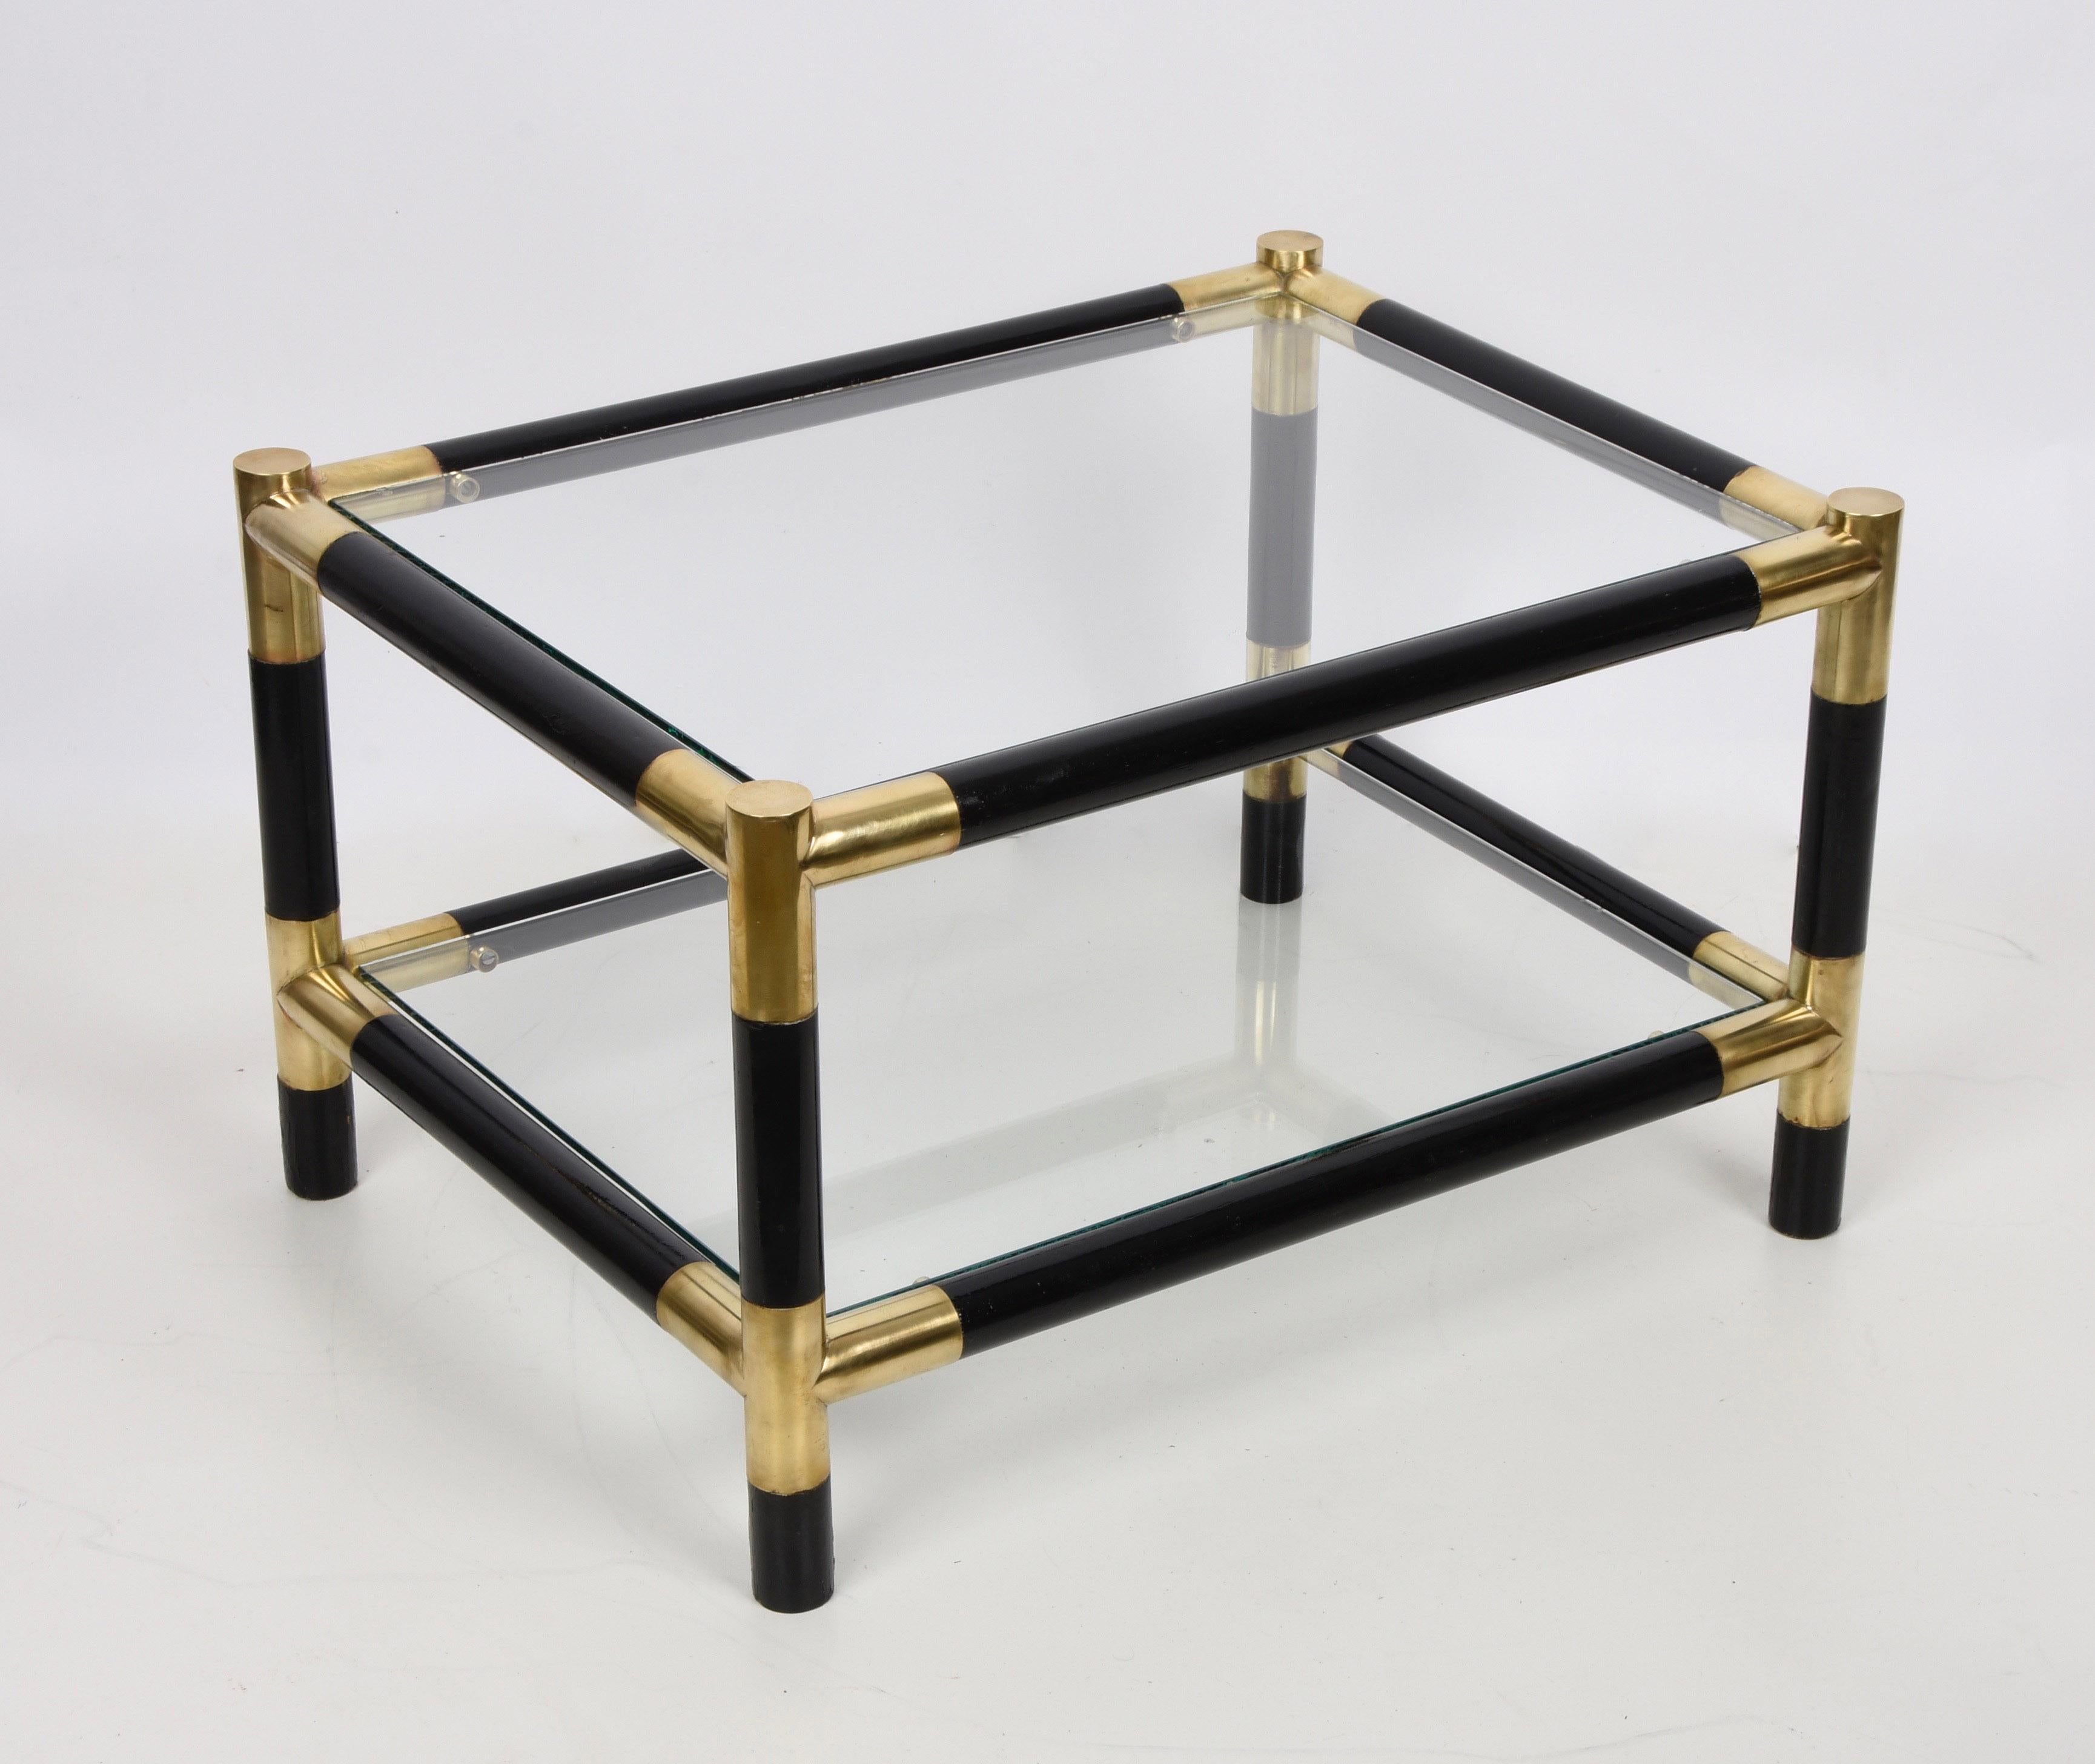 Midcentury Wood and Brass Italian Side Table with Two Crystal Shelves, 1970s For Sale 2